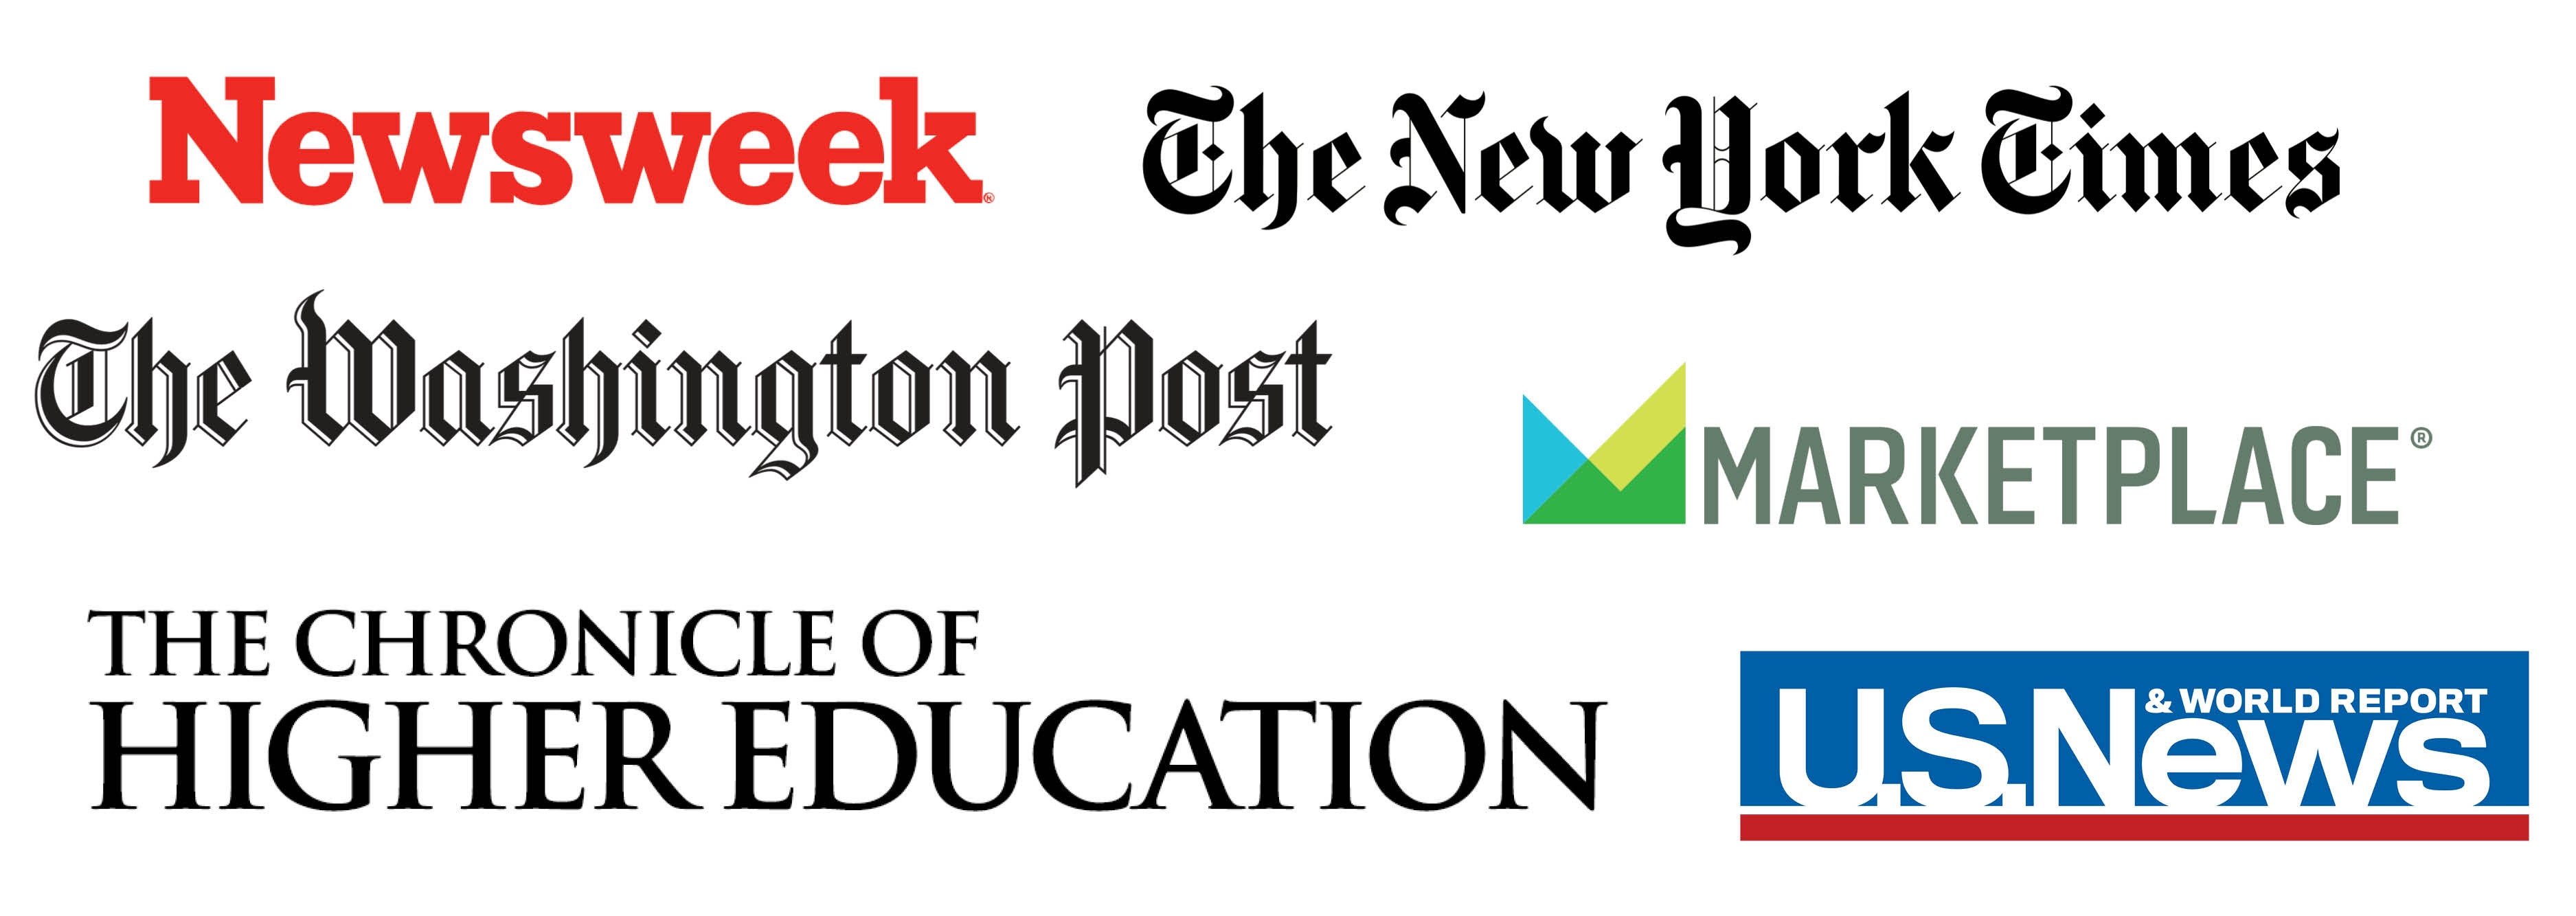 A collage of national media outlet logos, including Newswee, The New York Times, The Washington Post, Marketplace, The Chronicle of Higher Education, U.S. News & World Report